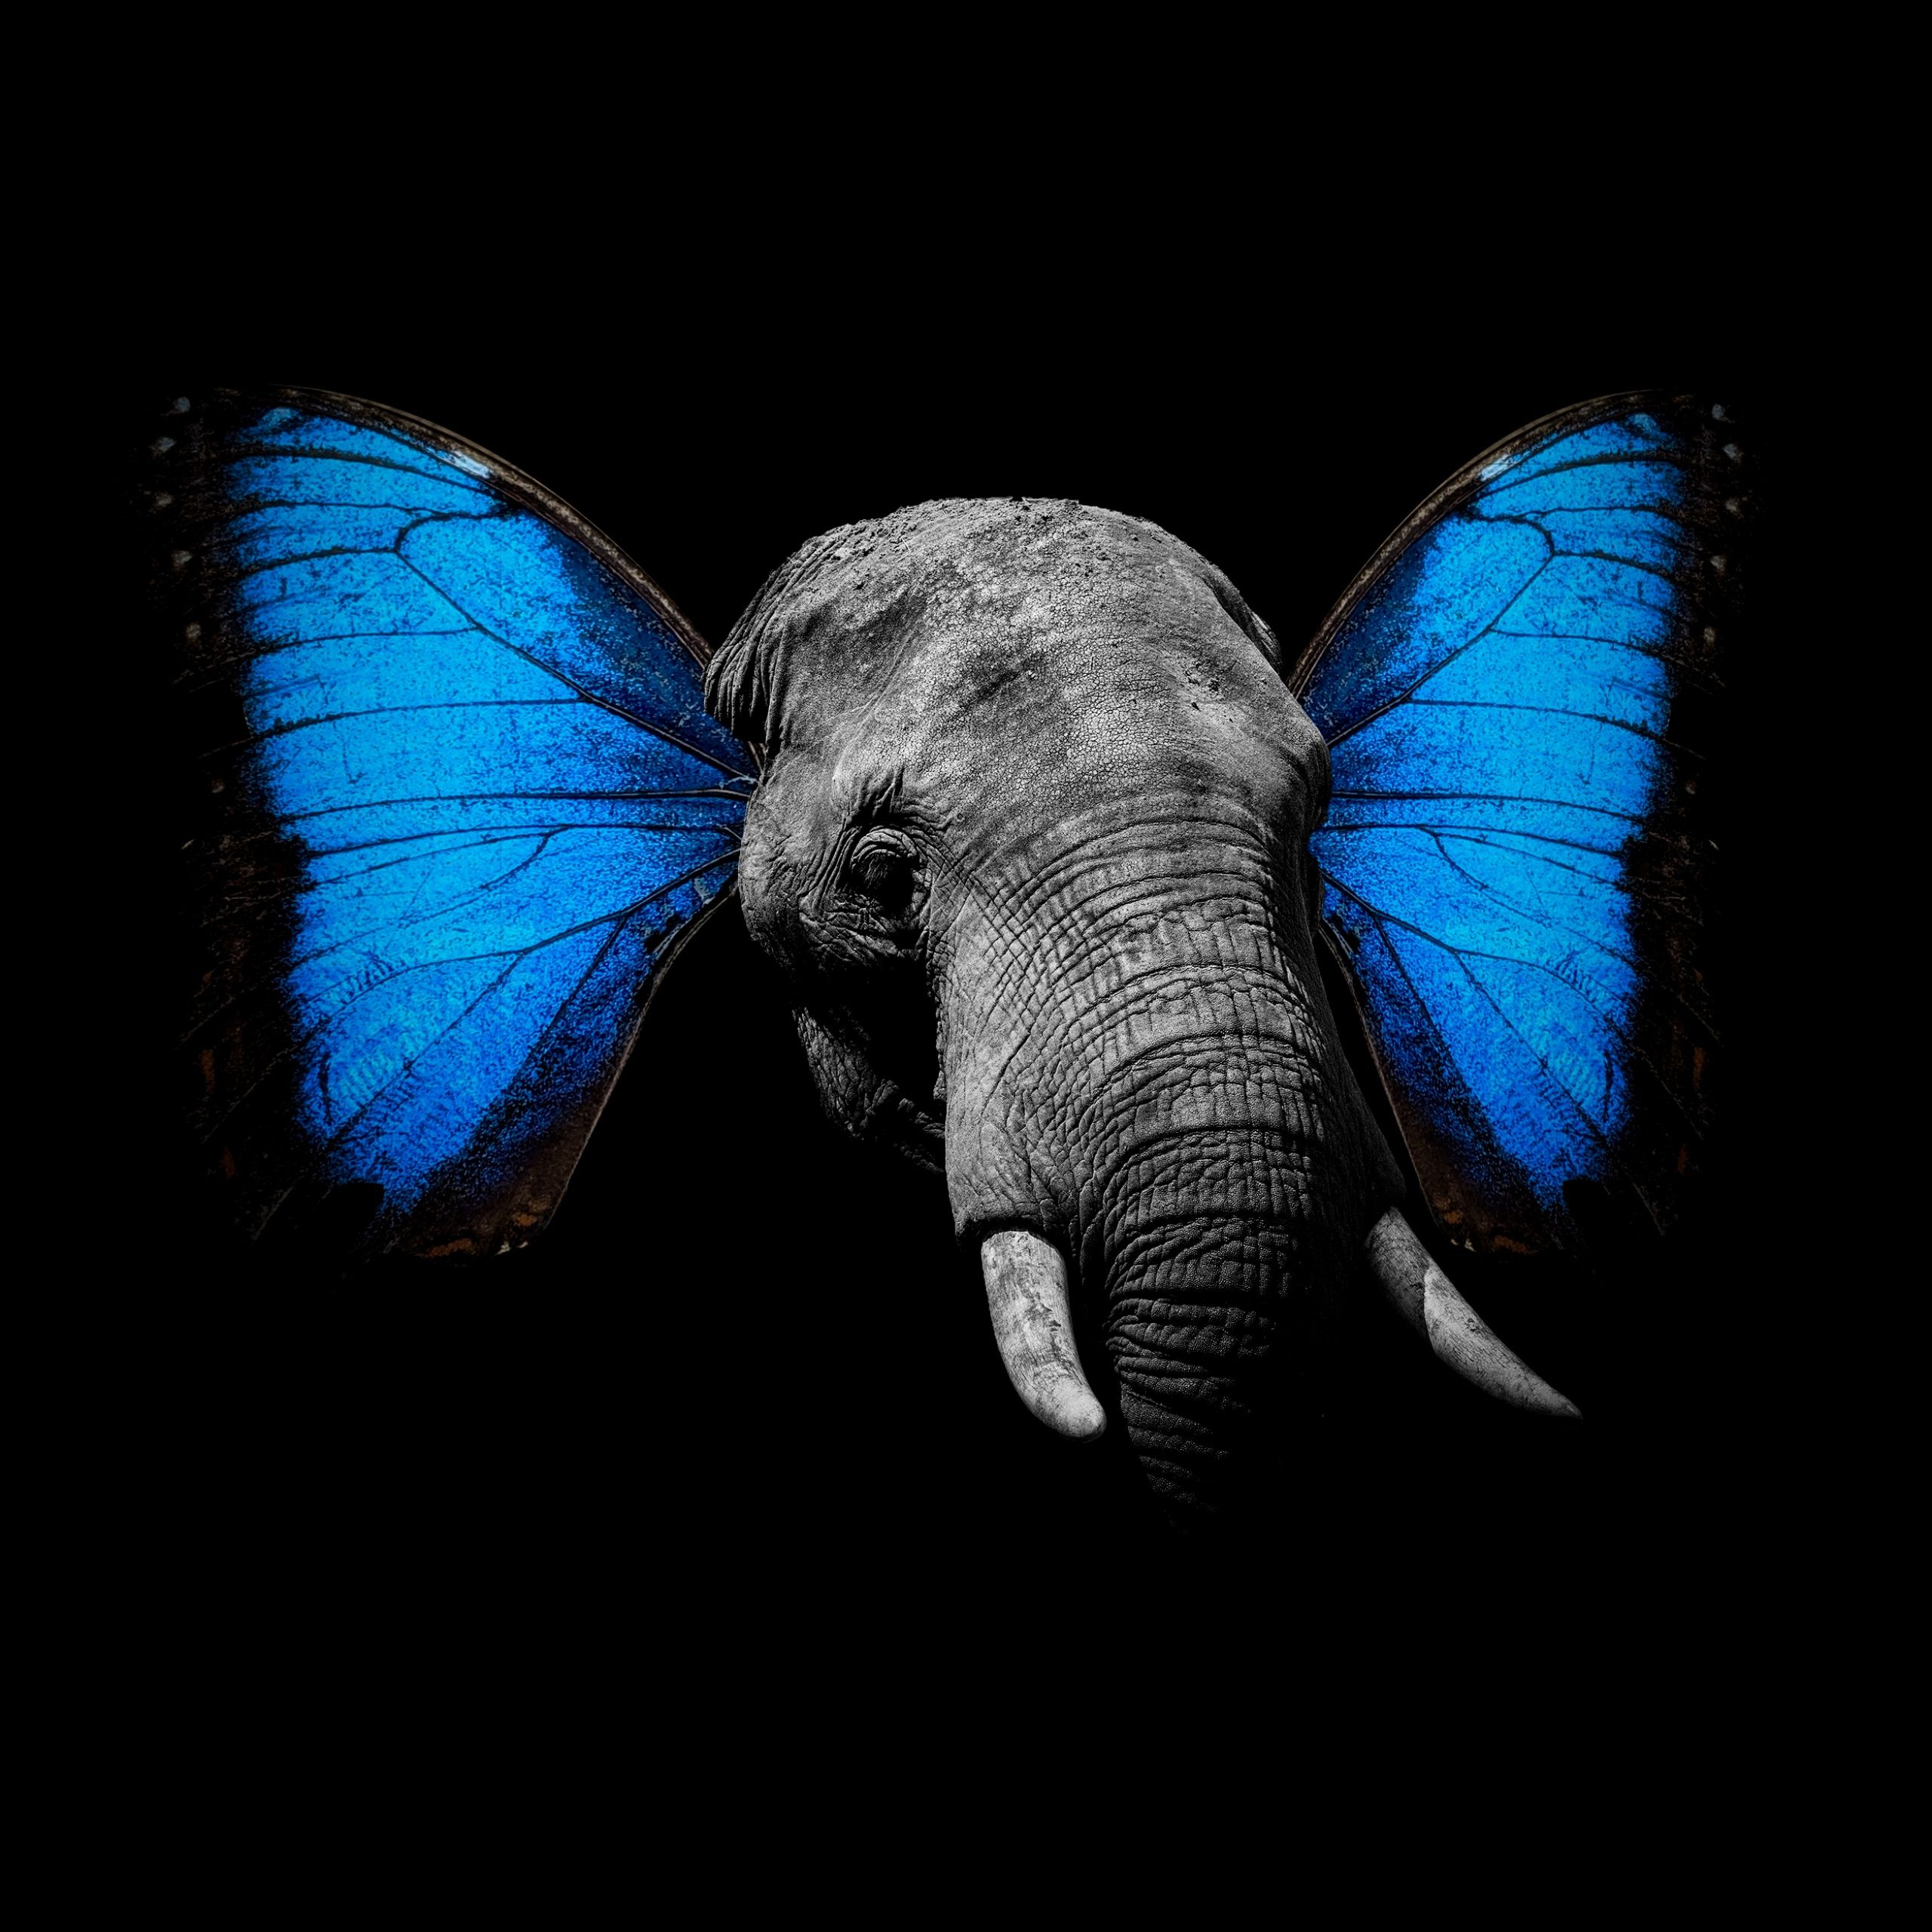 An elephant with blue butterfly wings - Elephant